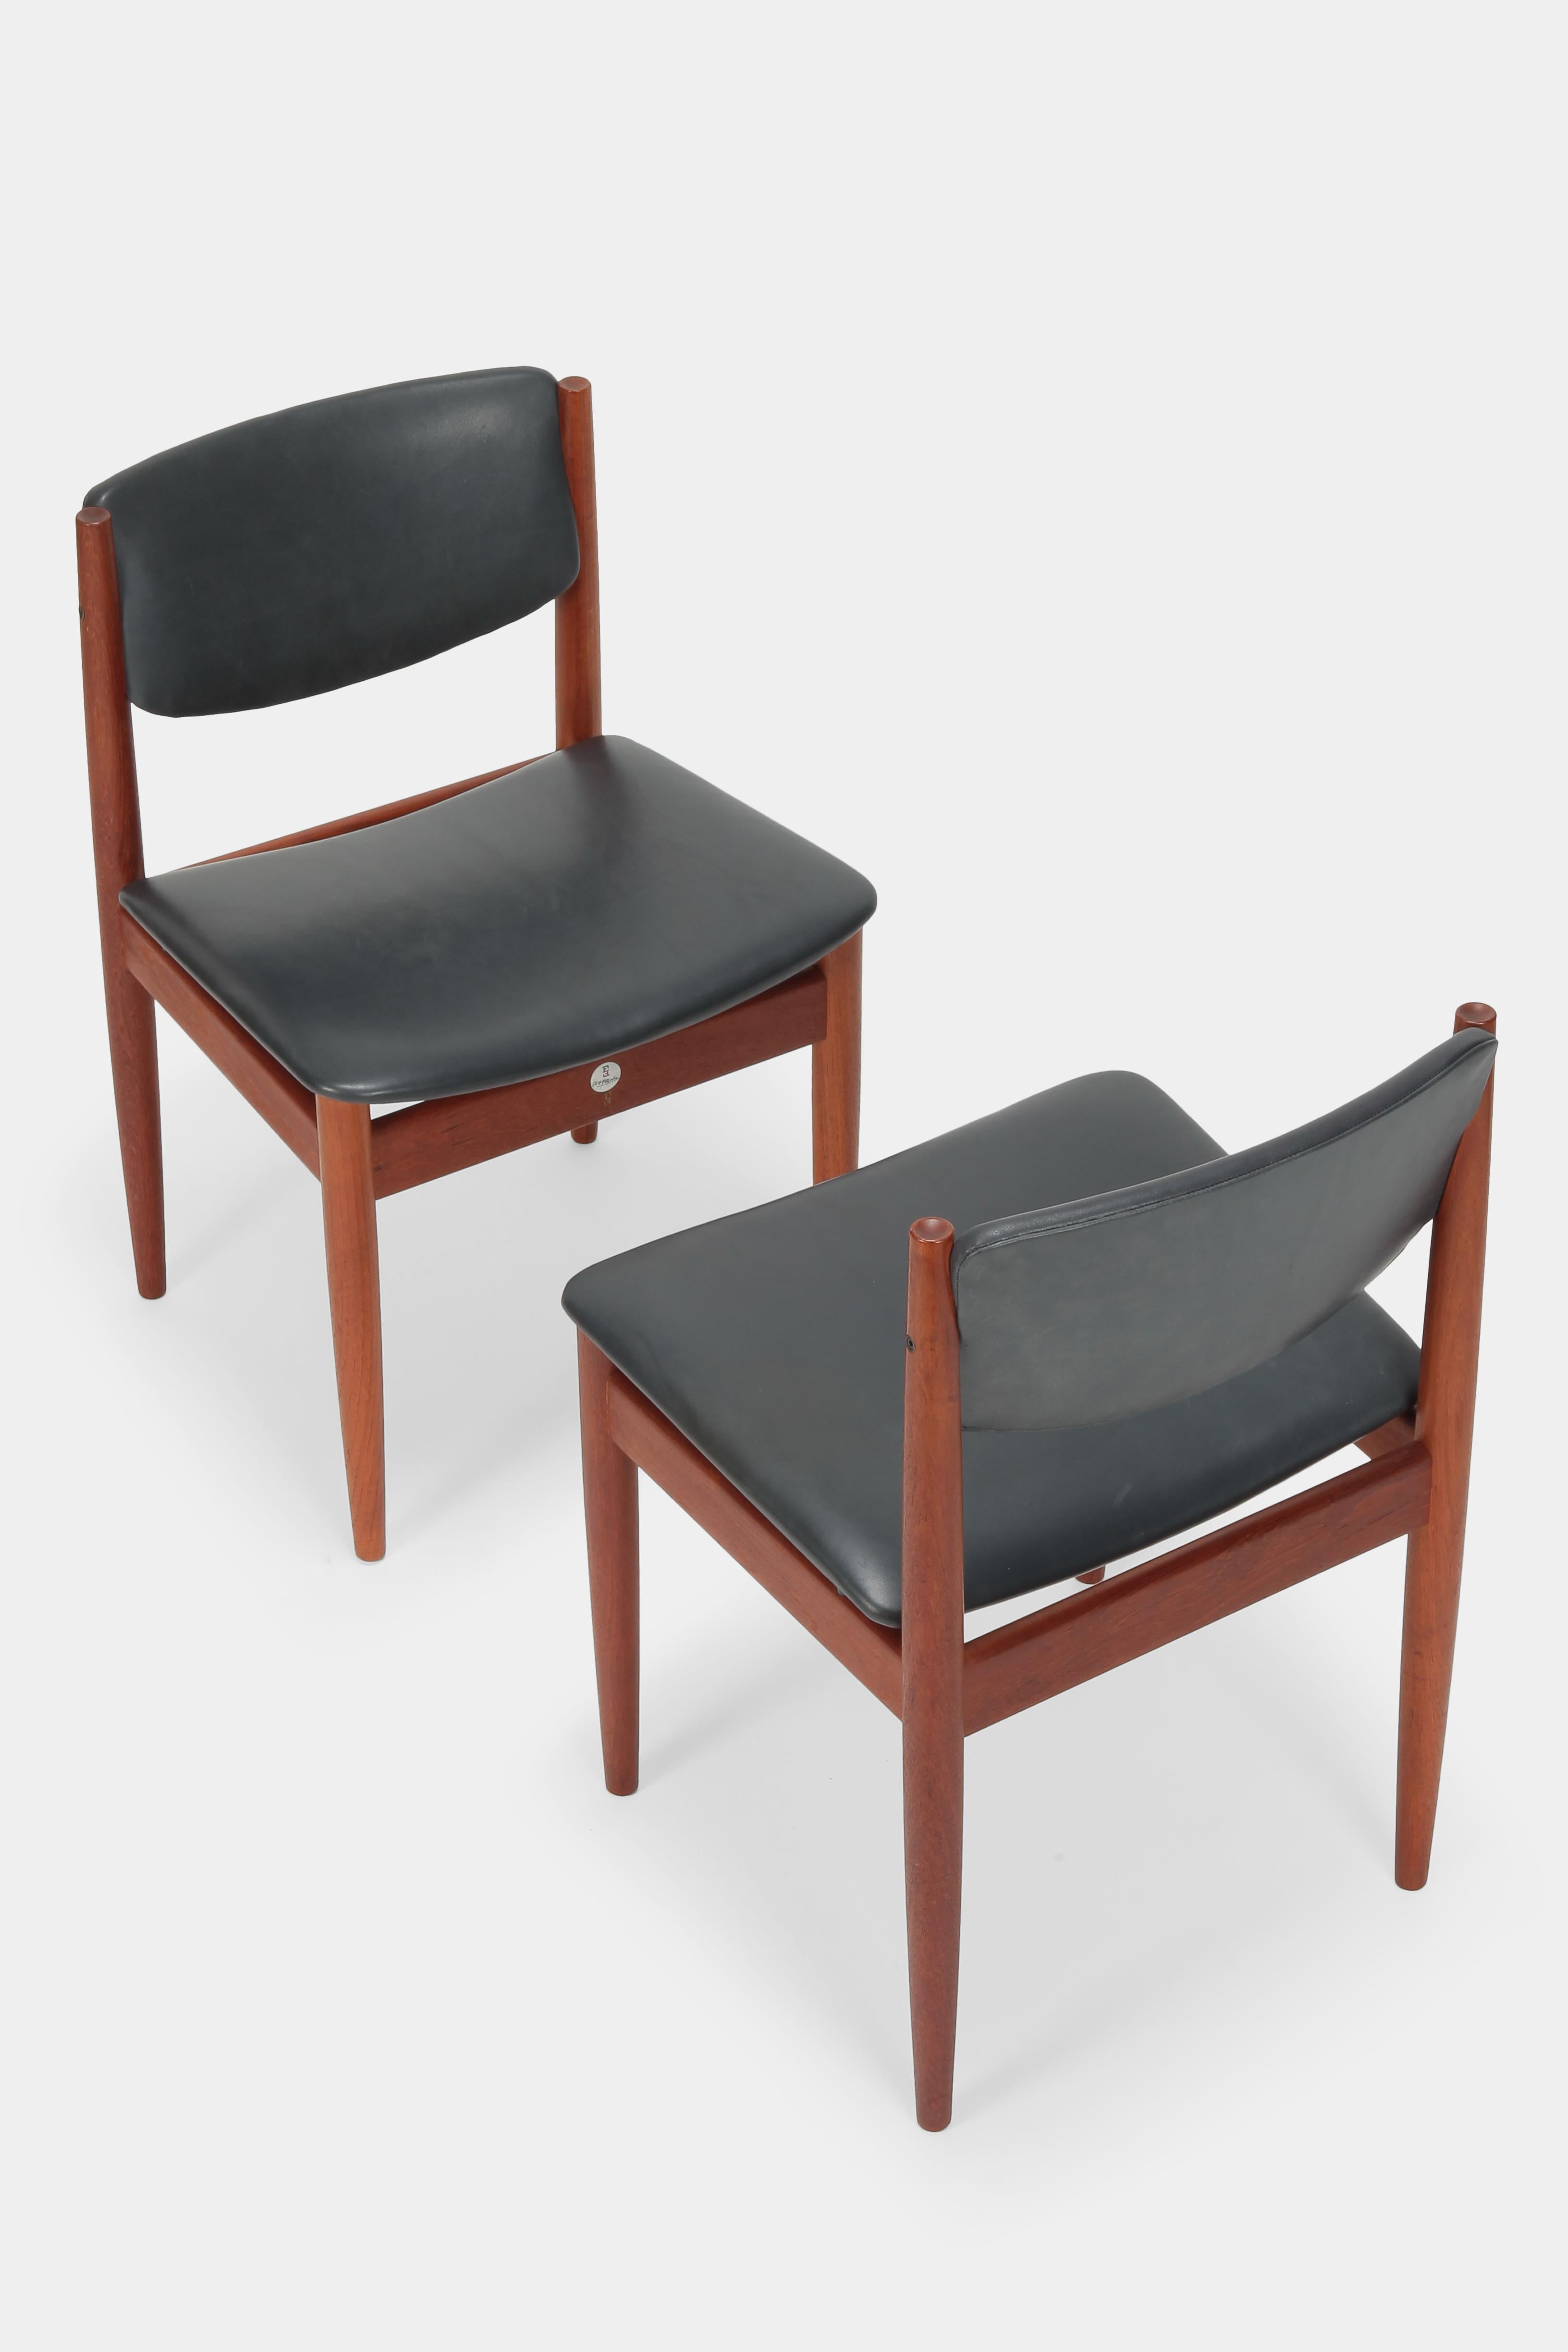 Two Finn Juhl model 197 chairs made by France and Son in Denmark in the sixties. Solid teak frame with very high production quality. Covered with Fine soft leather. Manufacturer aluminium label with production number under the seat. In very nice